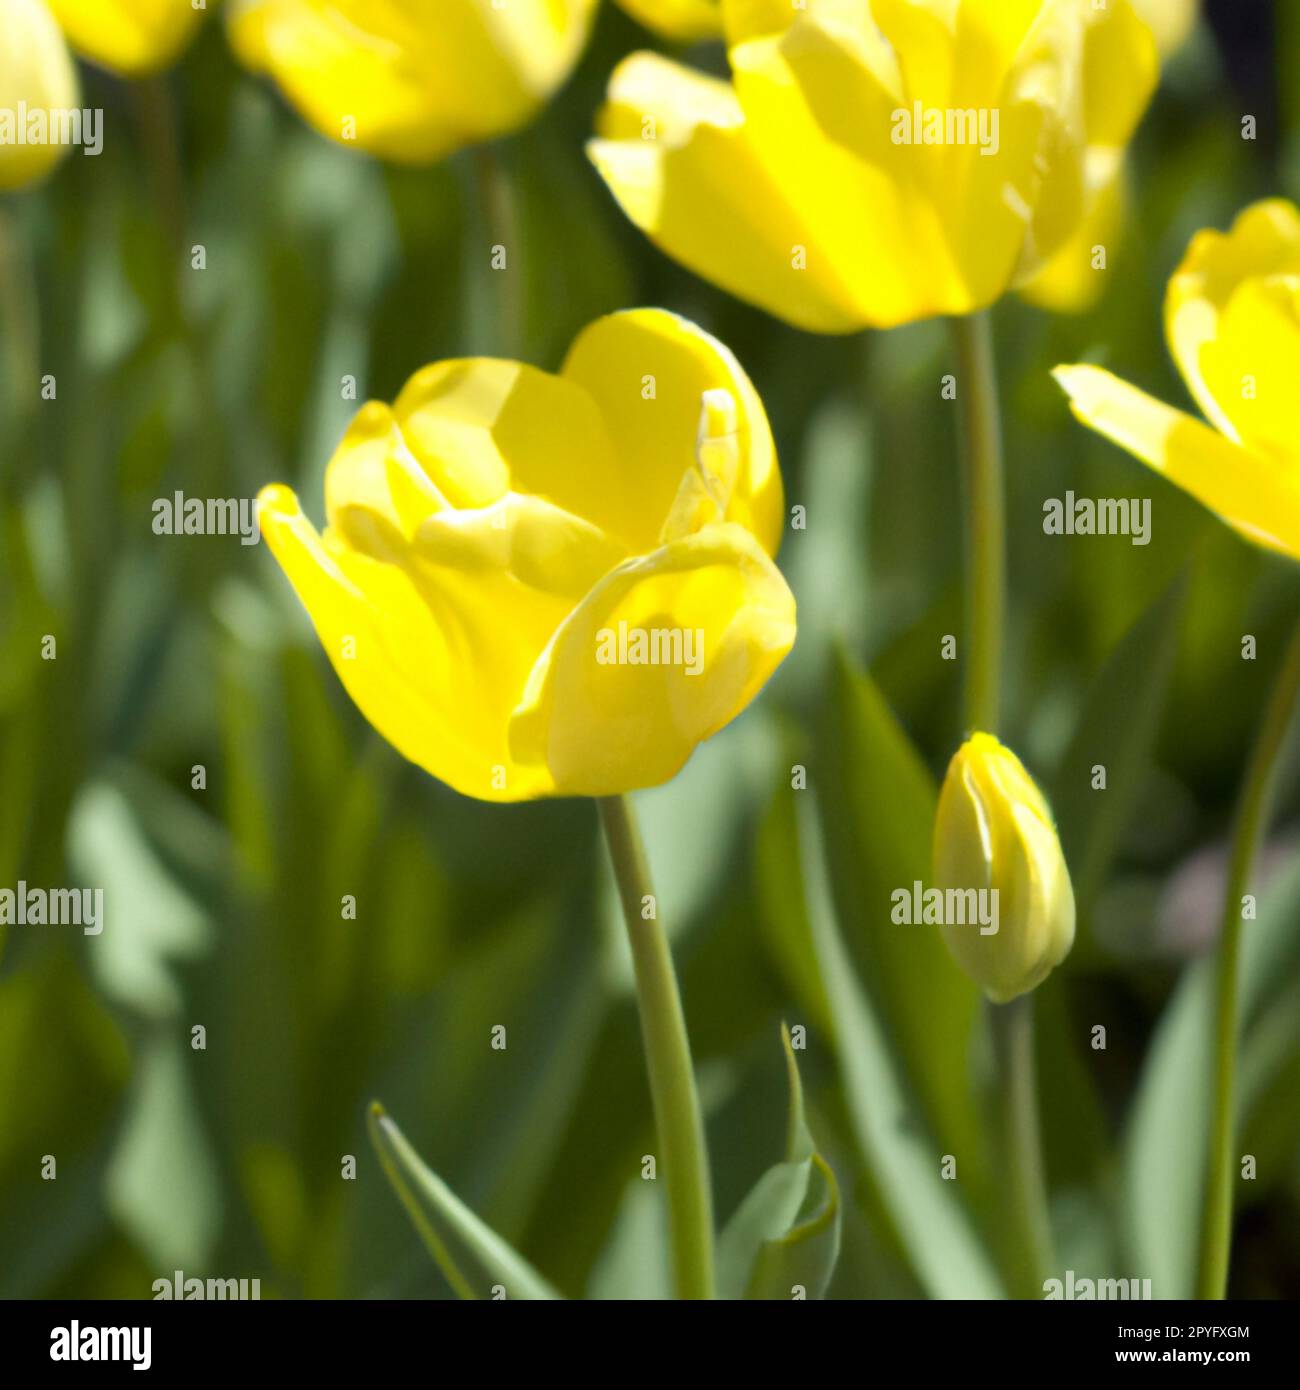 tulip Tulipa, bulbous herbs in the lily family Liliaceae. Tulips, garden flowers, cultivars and varieties have been developed. Flowers yellow delicate. Beautiful buds. Landscaping, flowerbed. Stock Photo